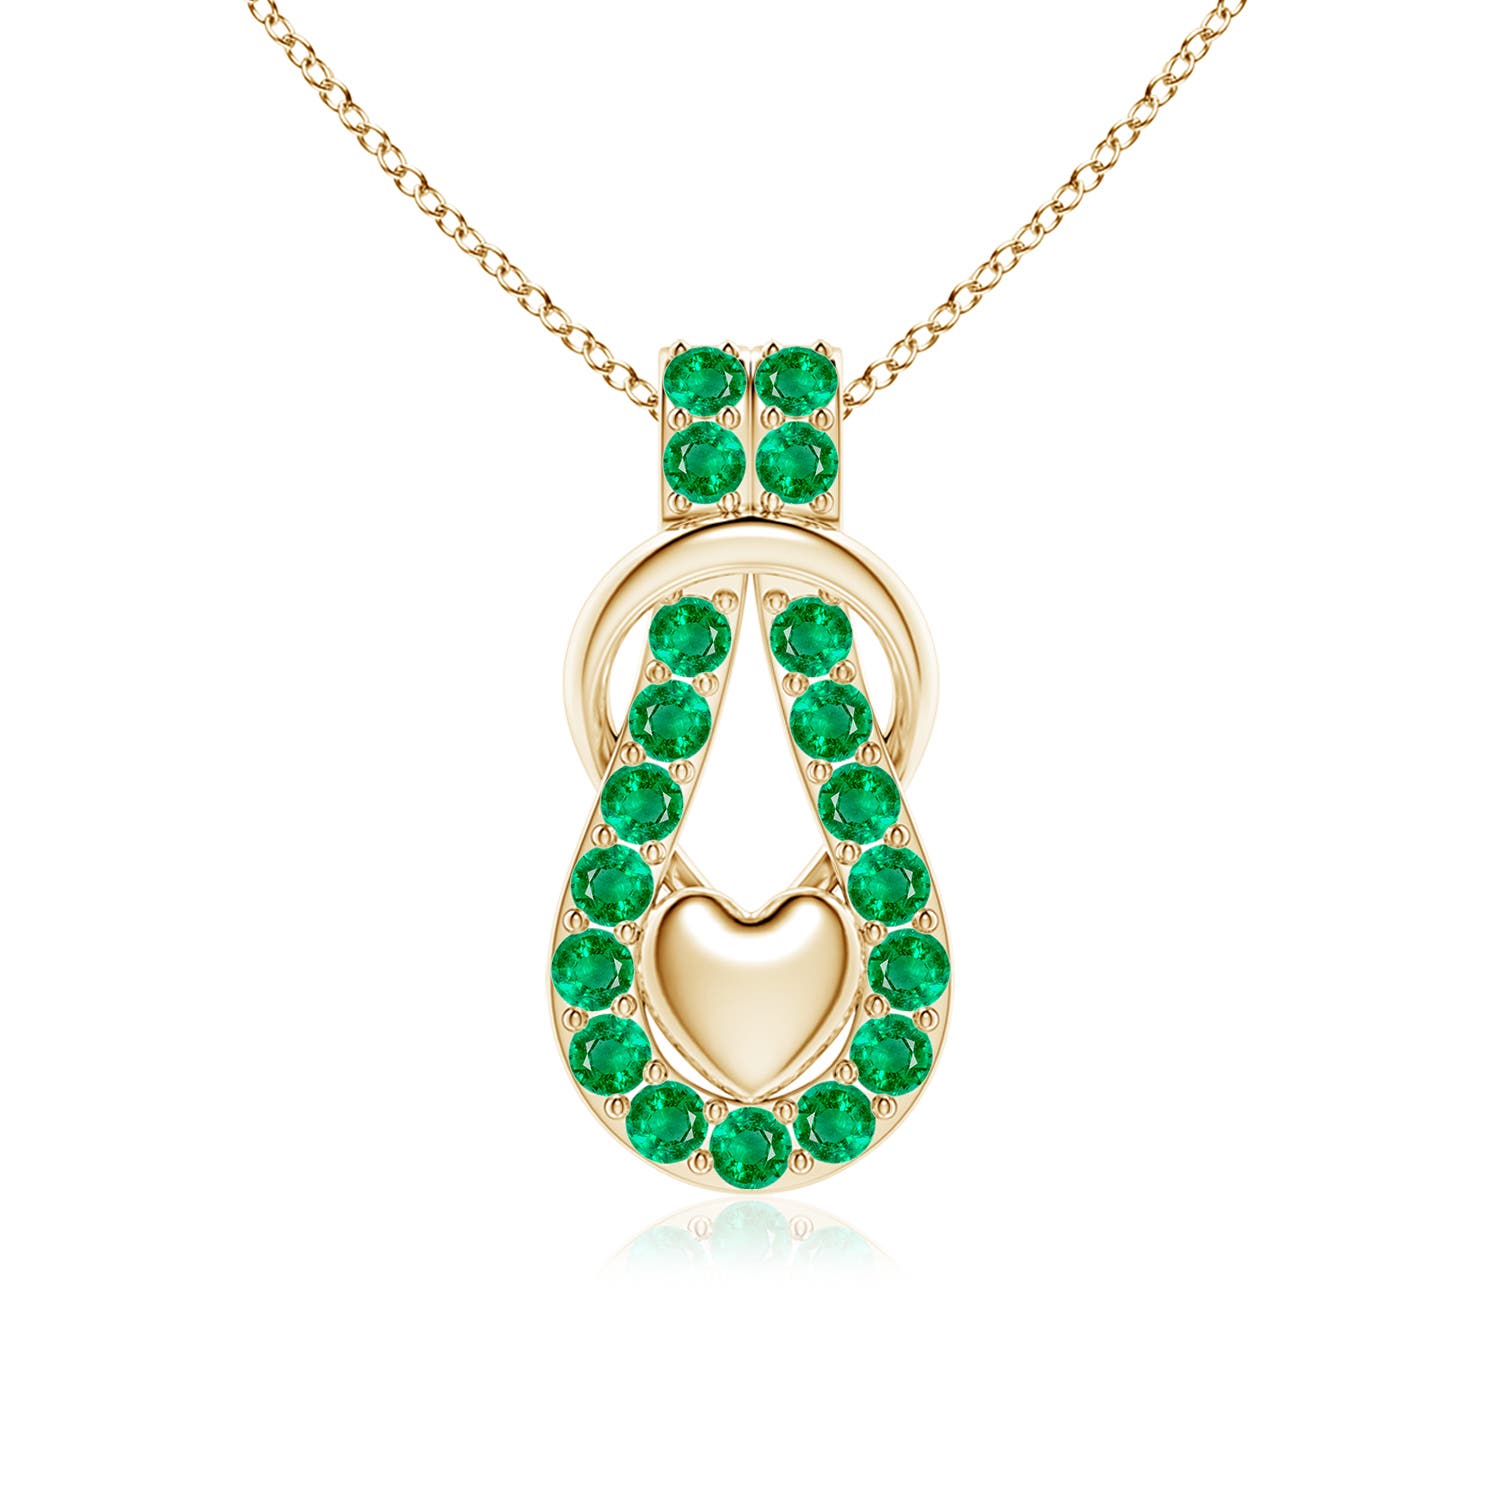 AAA - Emerald / 1.2 CT / 18 KT Yellow Gold